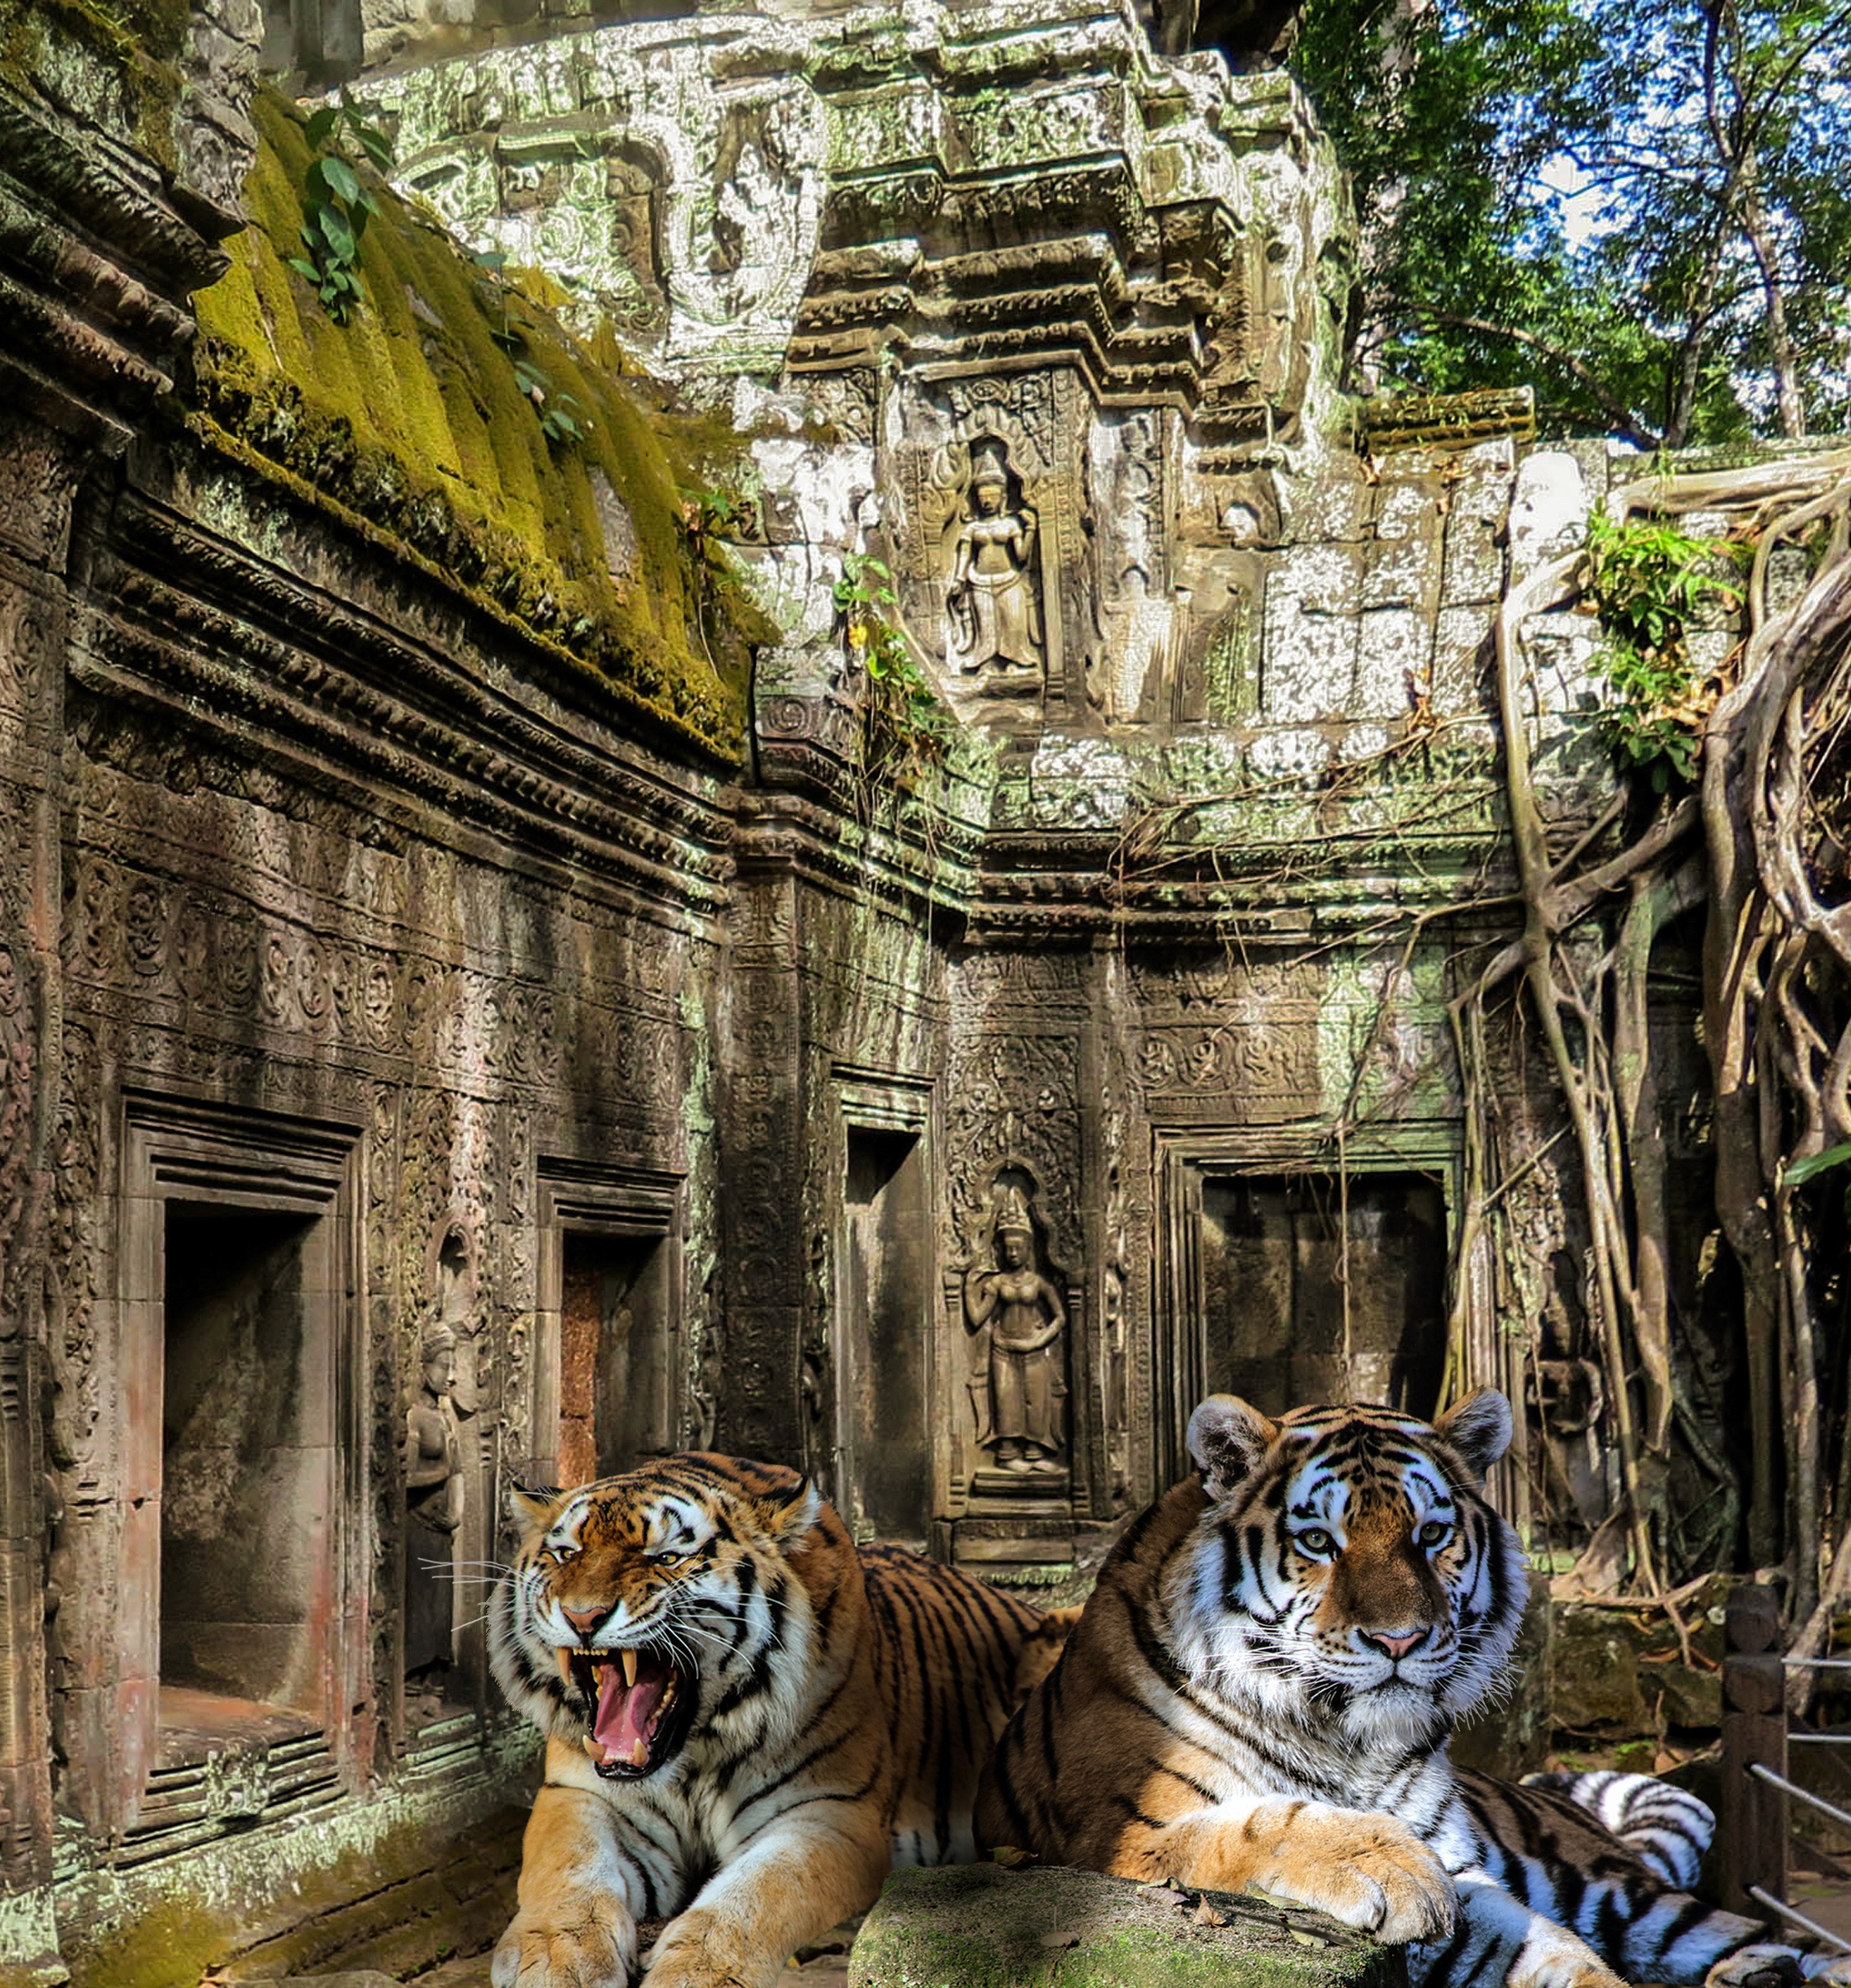 Tigers in the temple photo